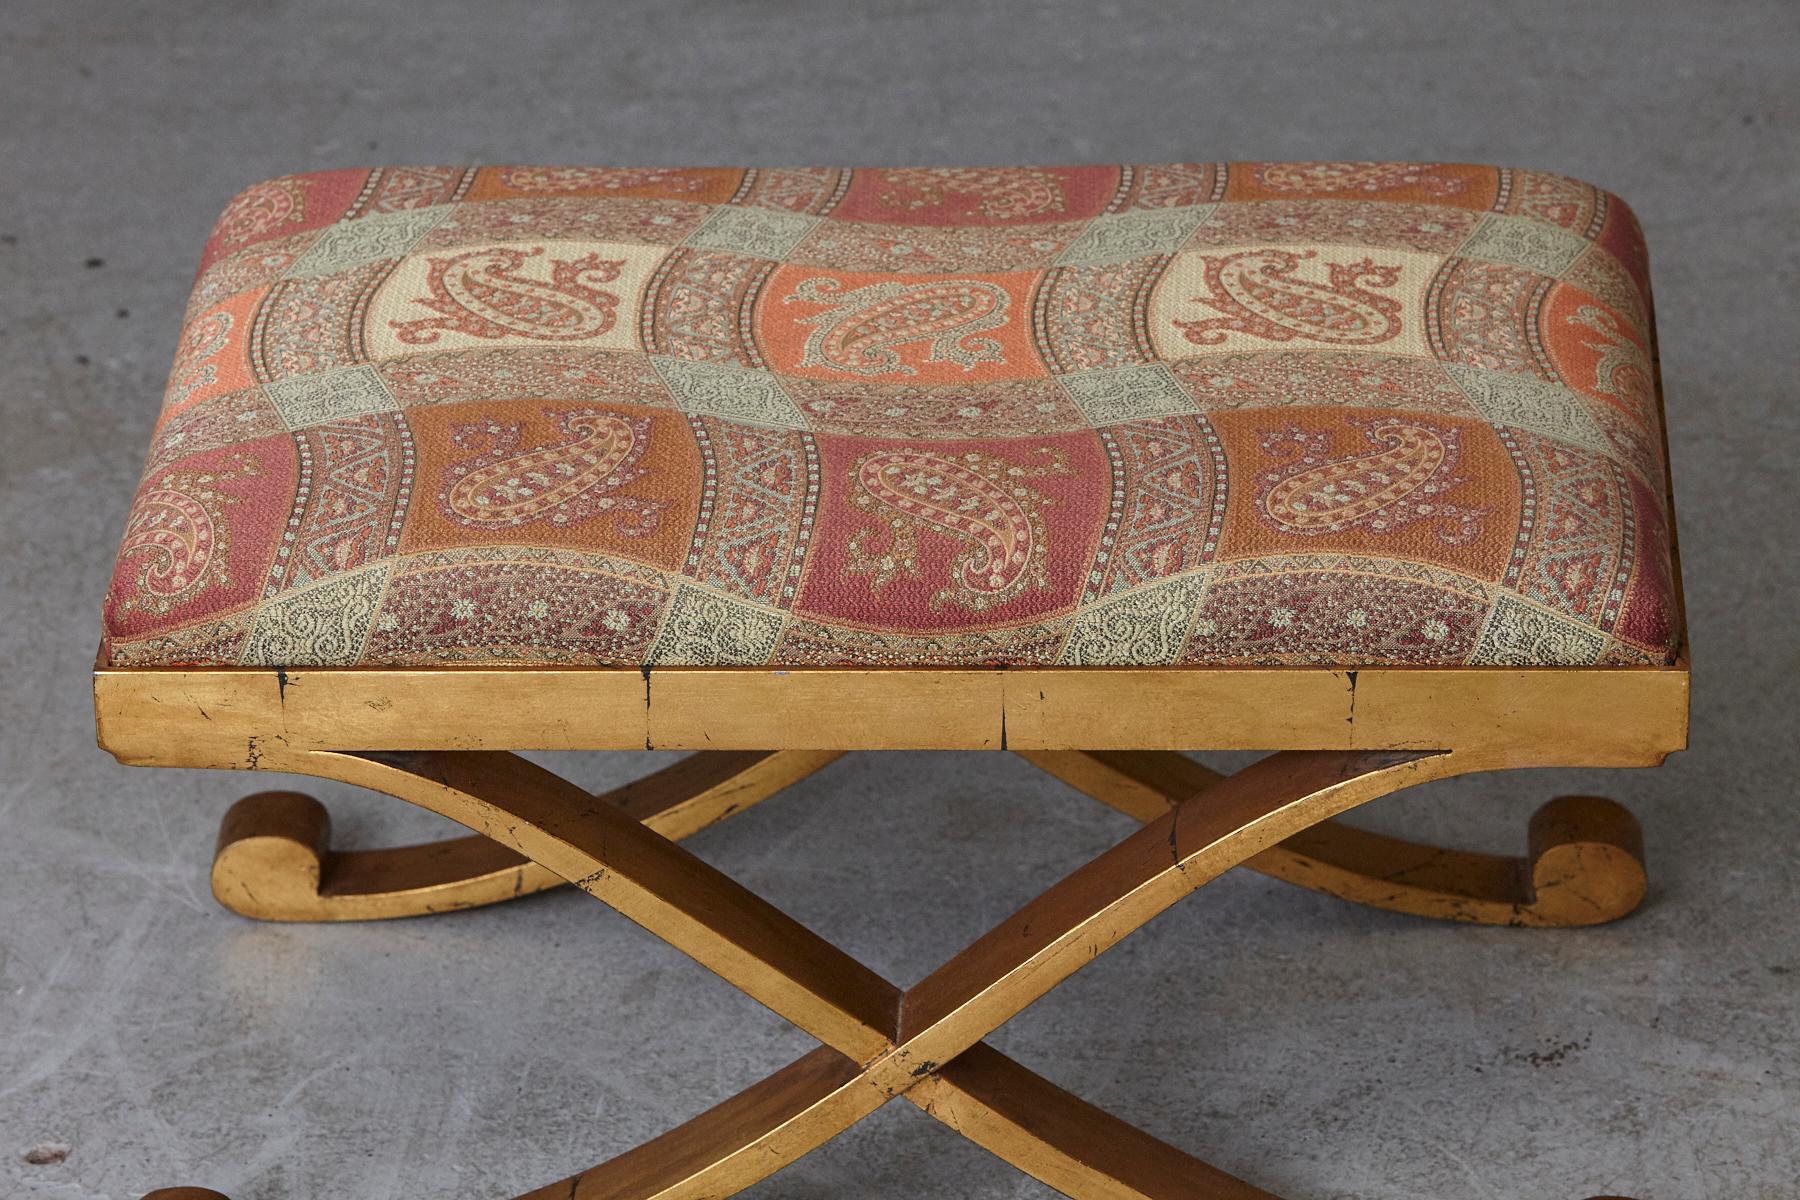 Late 20th Century Gild Patinated Metal Bench with Cross Legs Upholstered in Paisley Fabric